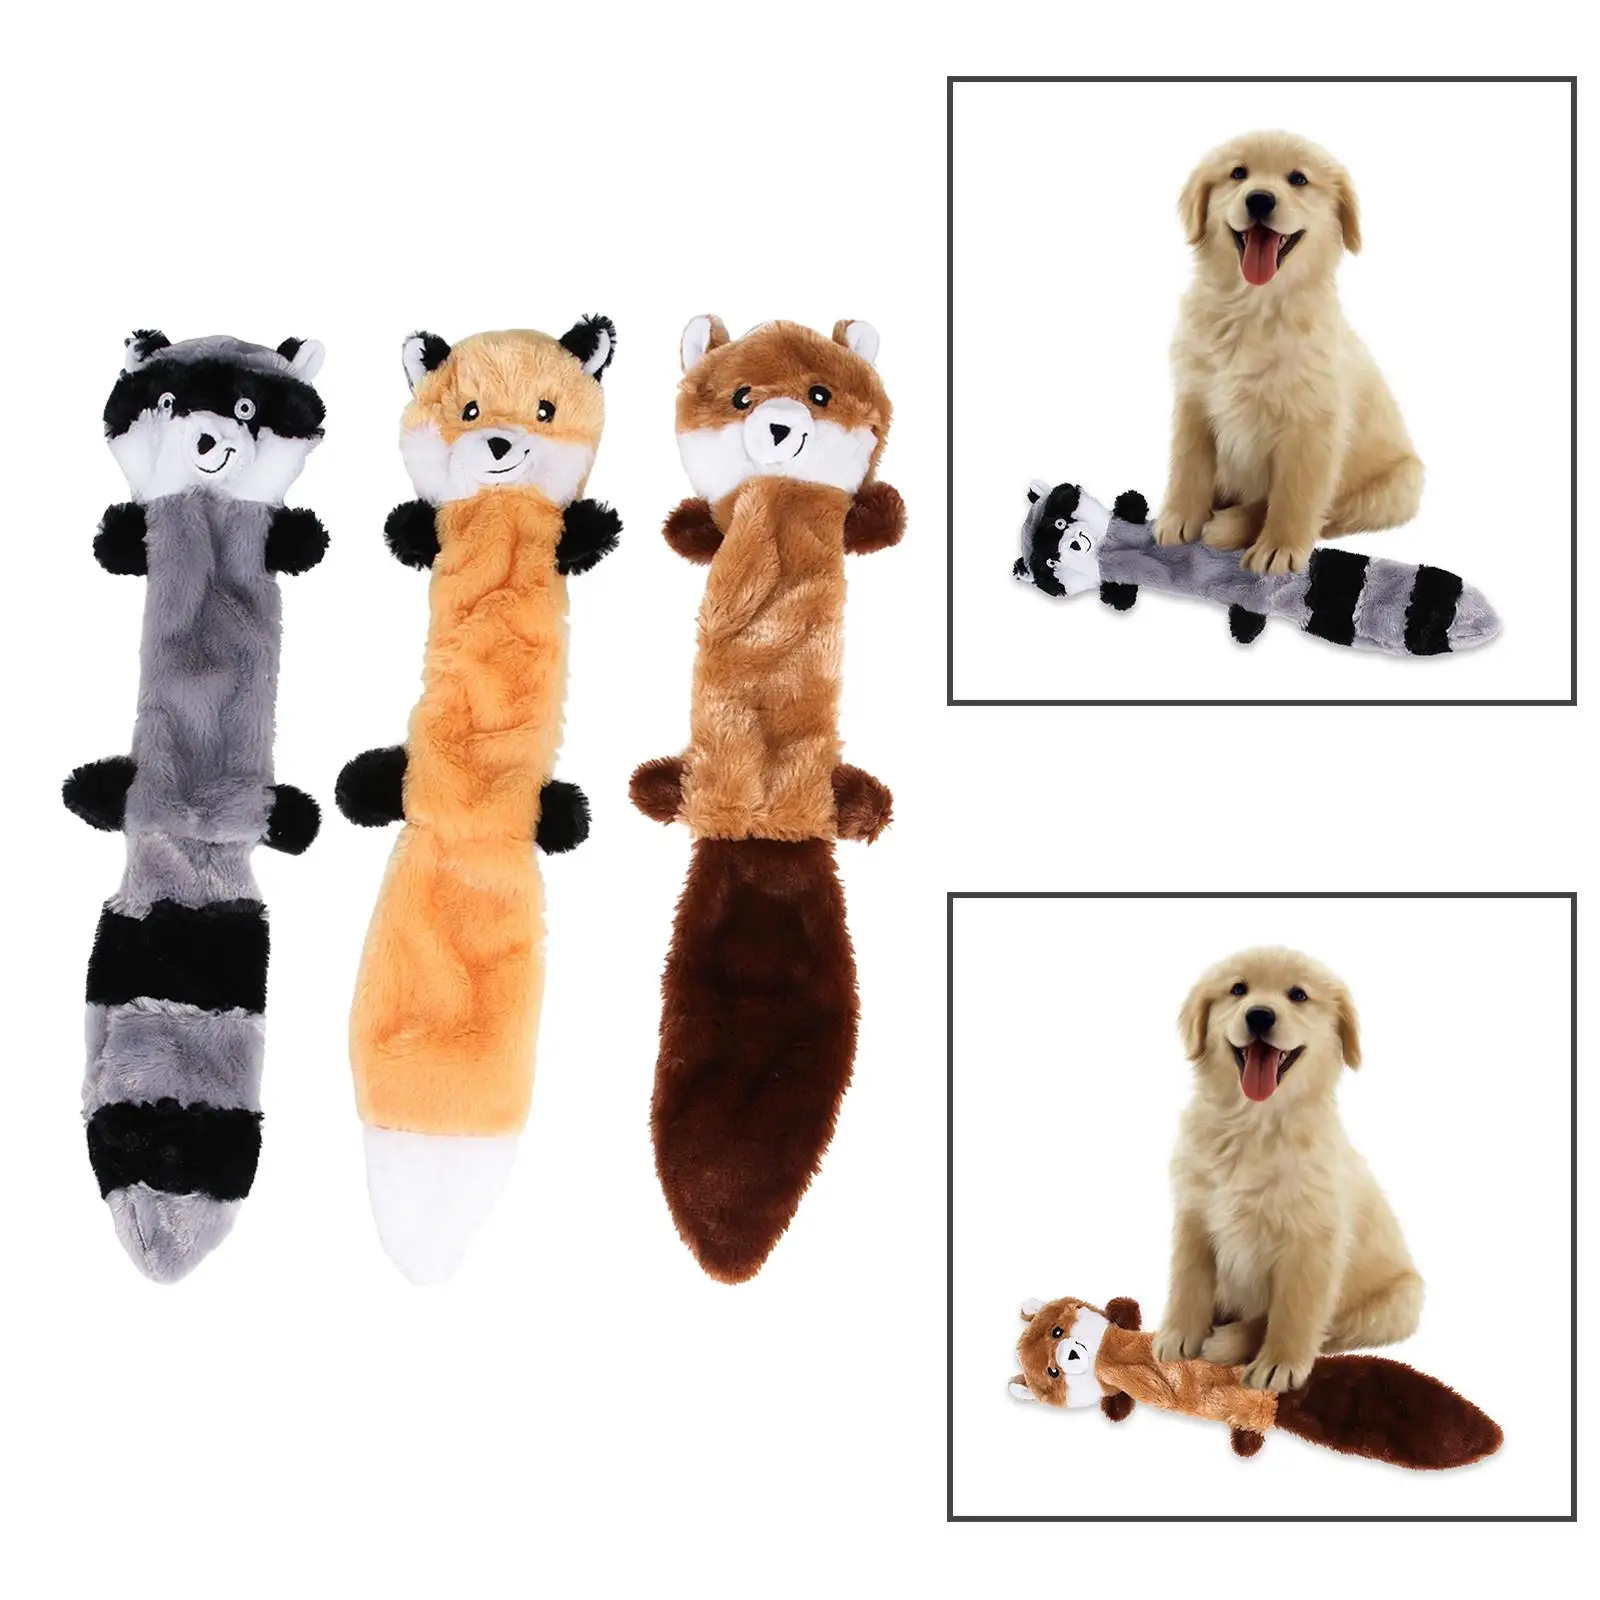 Pet Doggie Toy Training Chew Bite Resistant Soft Sound Interactive Durable Funny Pet Dog Toy No Stuffing for Small to Large Dogs